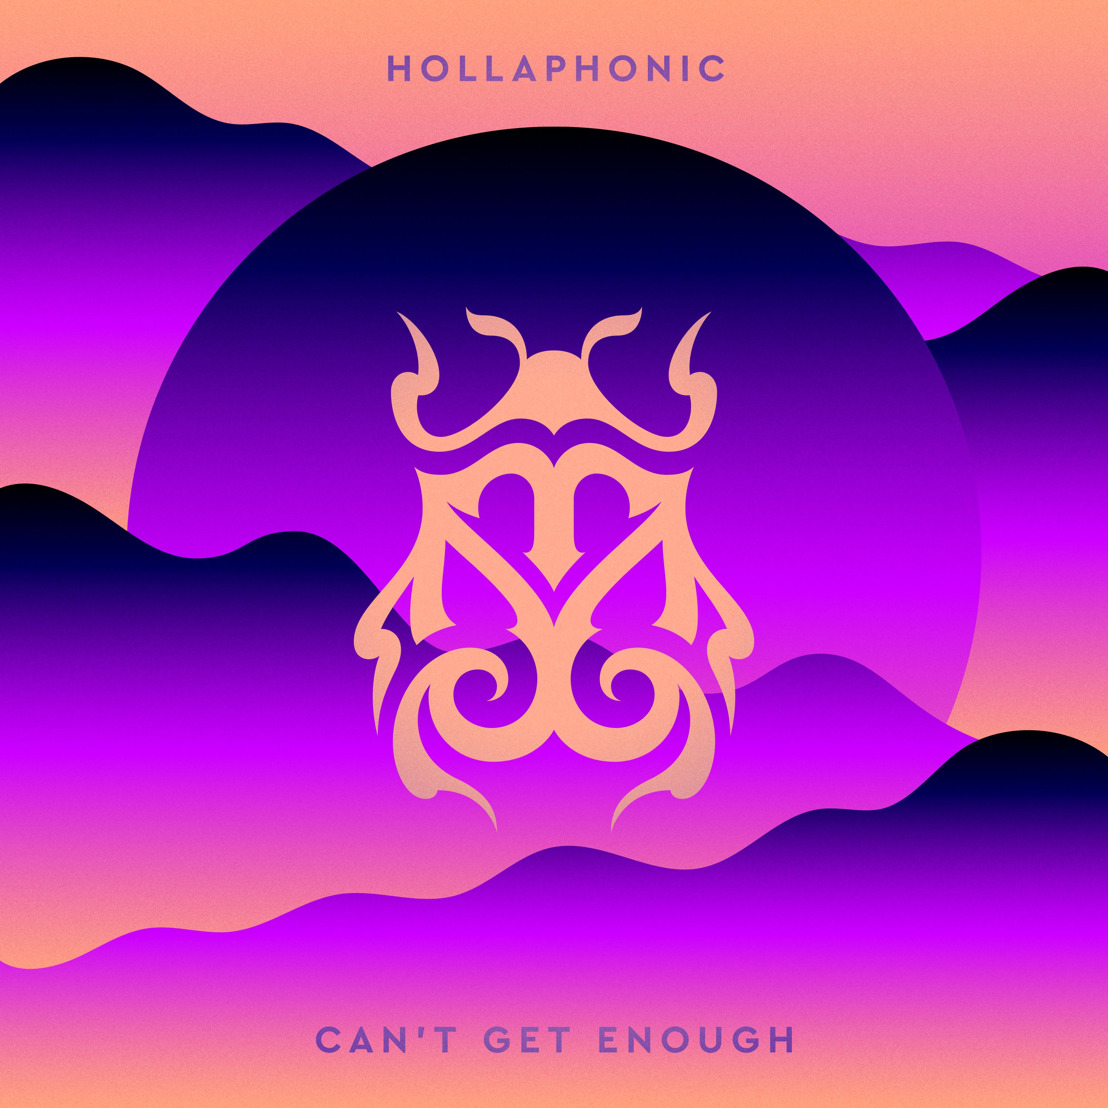 Hollaphonic drop another striking house record ‘Can’t Get Enough’